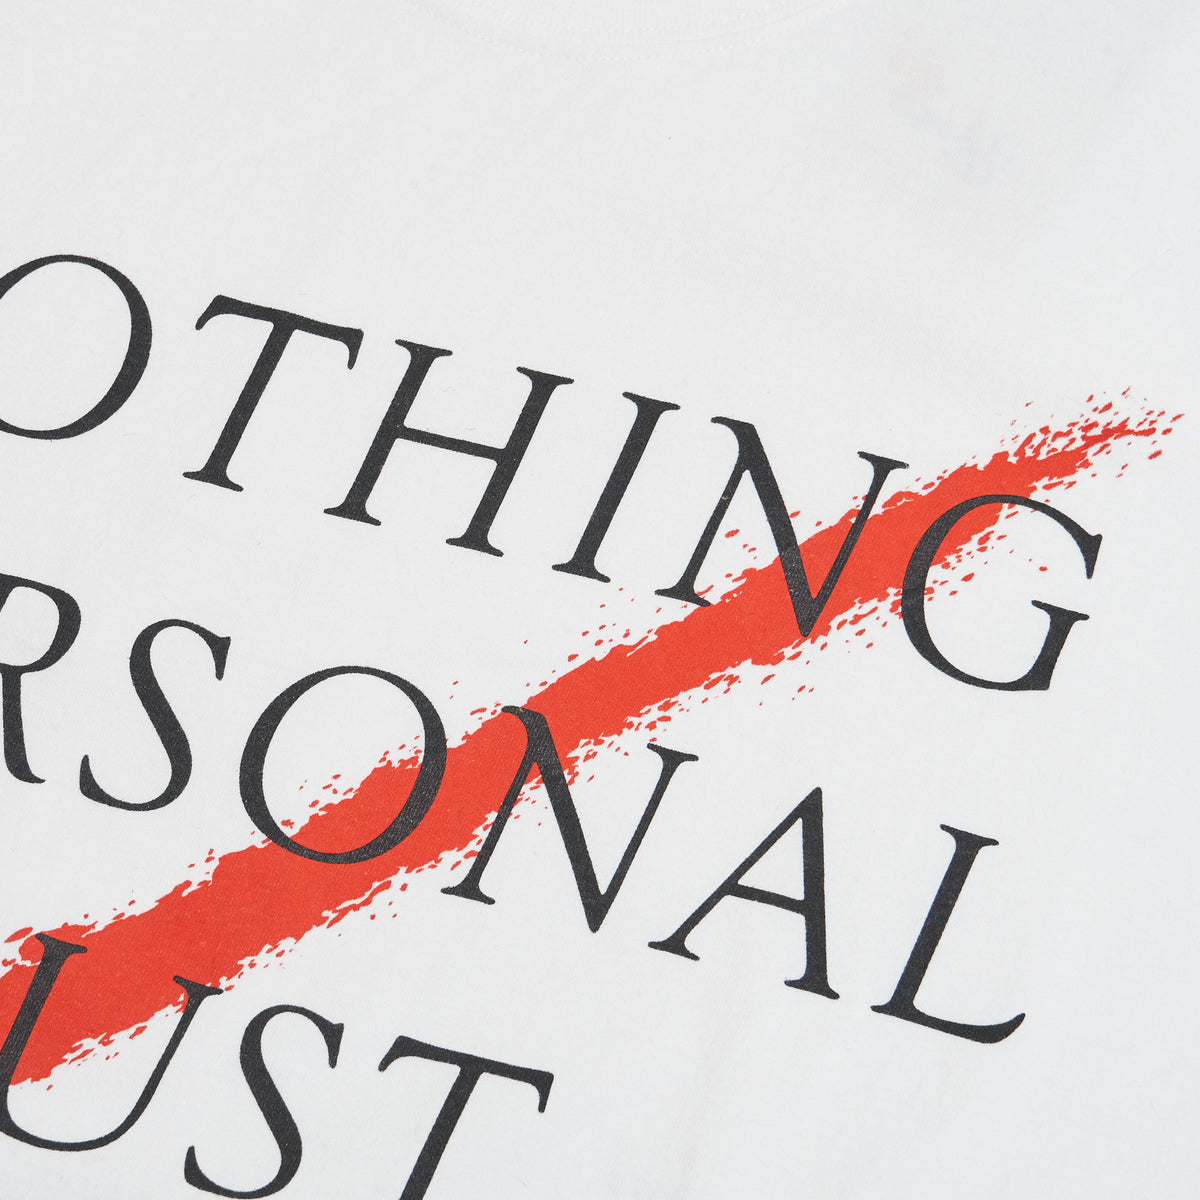 Neighborhood Printed T-Shirt Nothing Personal Just Business